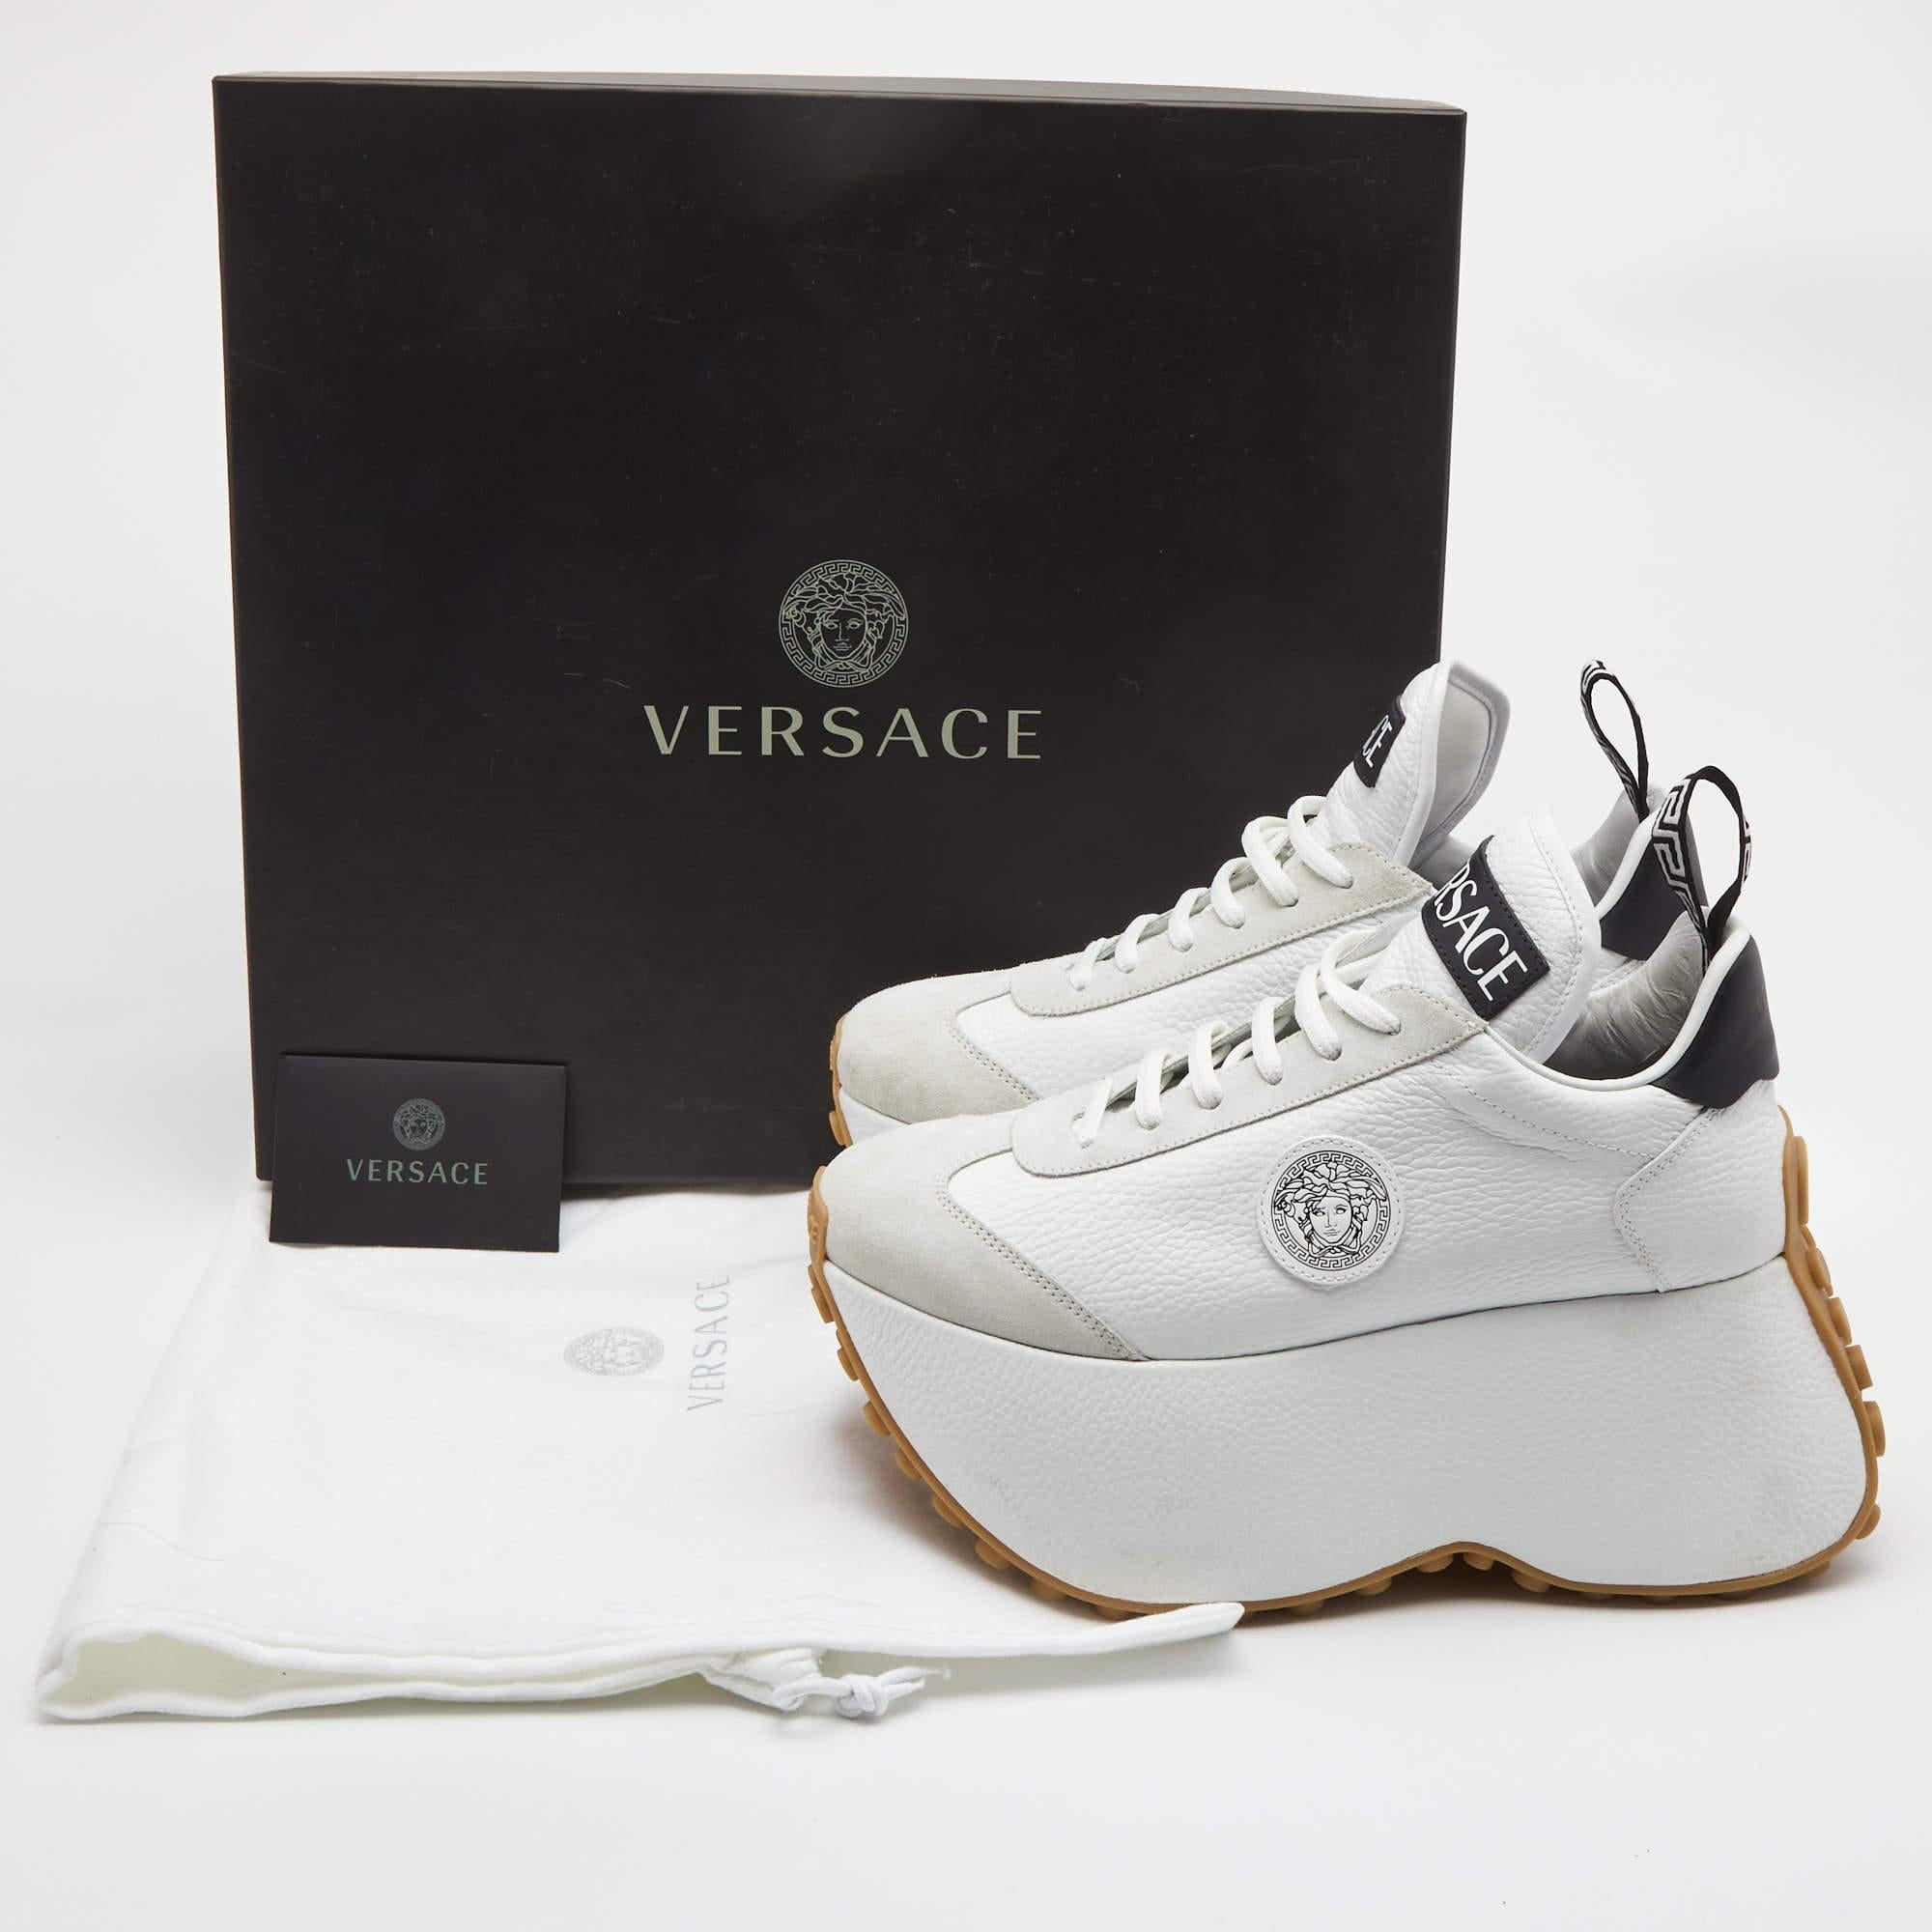 Versace White Leather and Suede Medusa Charm Detail Platform Sneakers Size 37.5 3